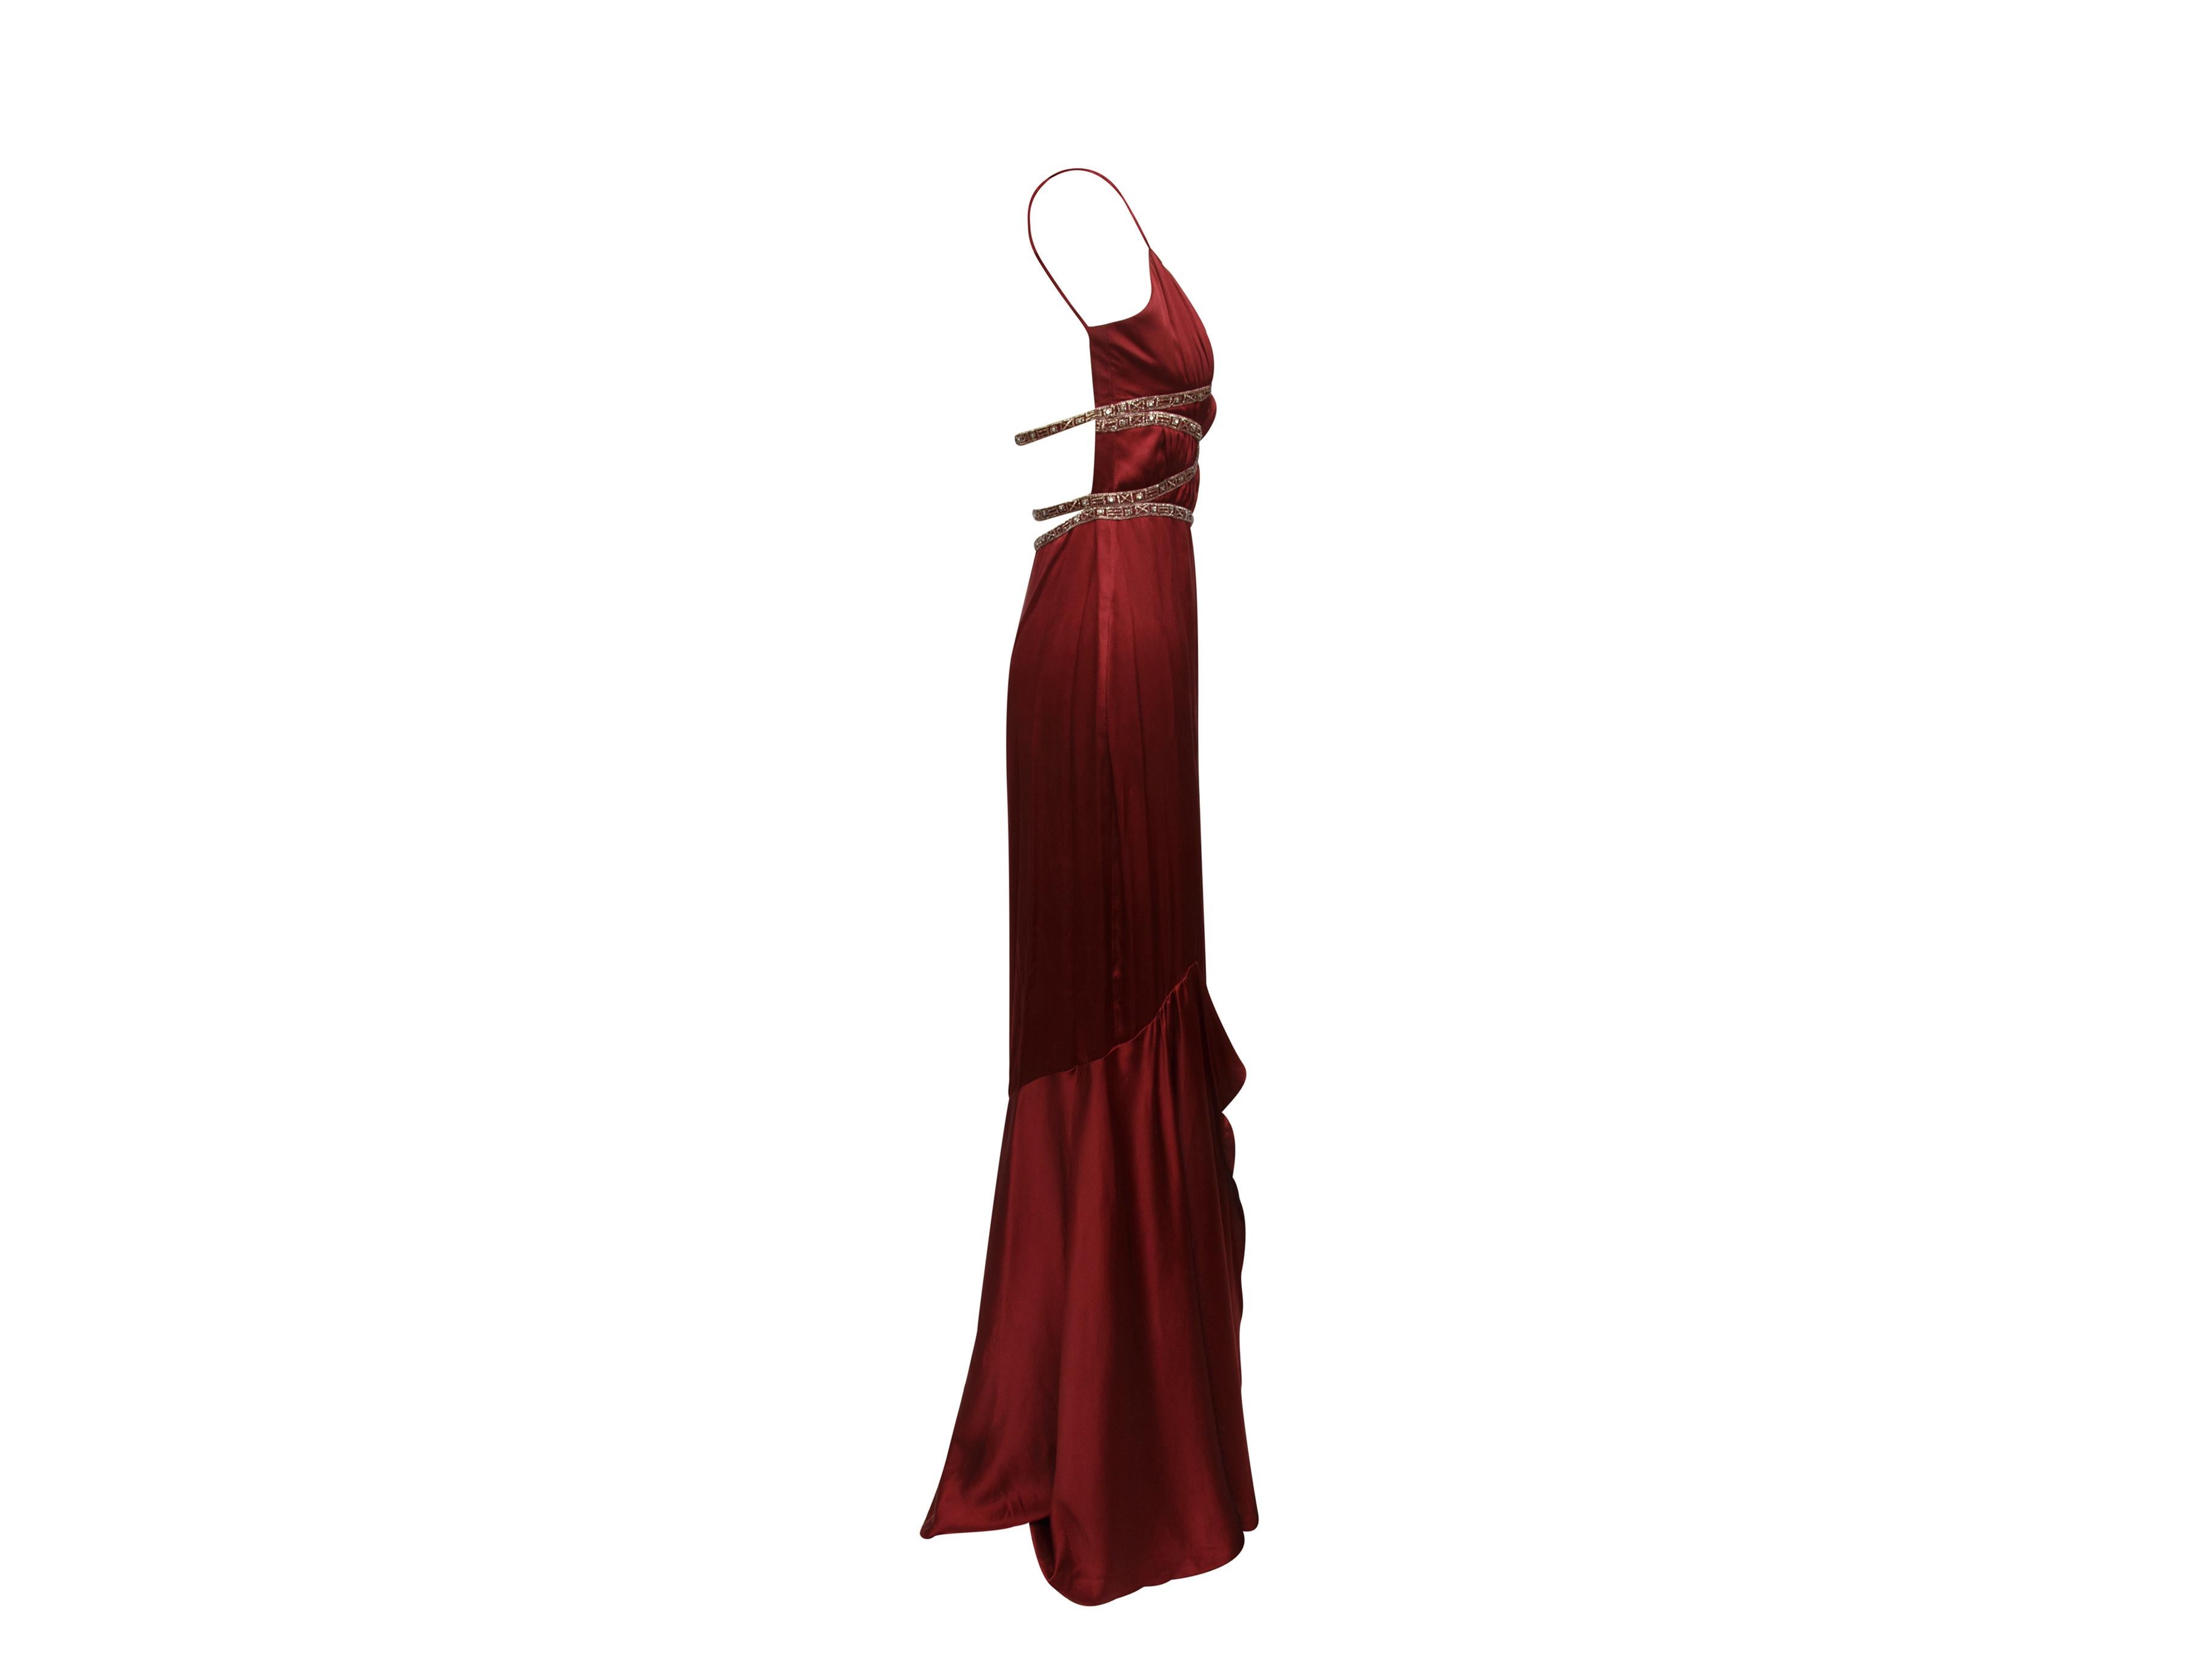 Product details:  Burgundy silk beaded bodice gown by Badgley Mischka.  Edie Falco's 2003 SAG Awards dress.  V-neck.  Sleeveless.  Ruffles cascade at side.  Concealed closure.  28